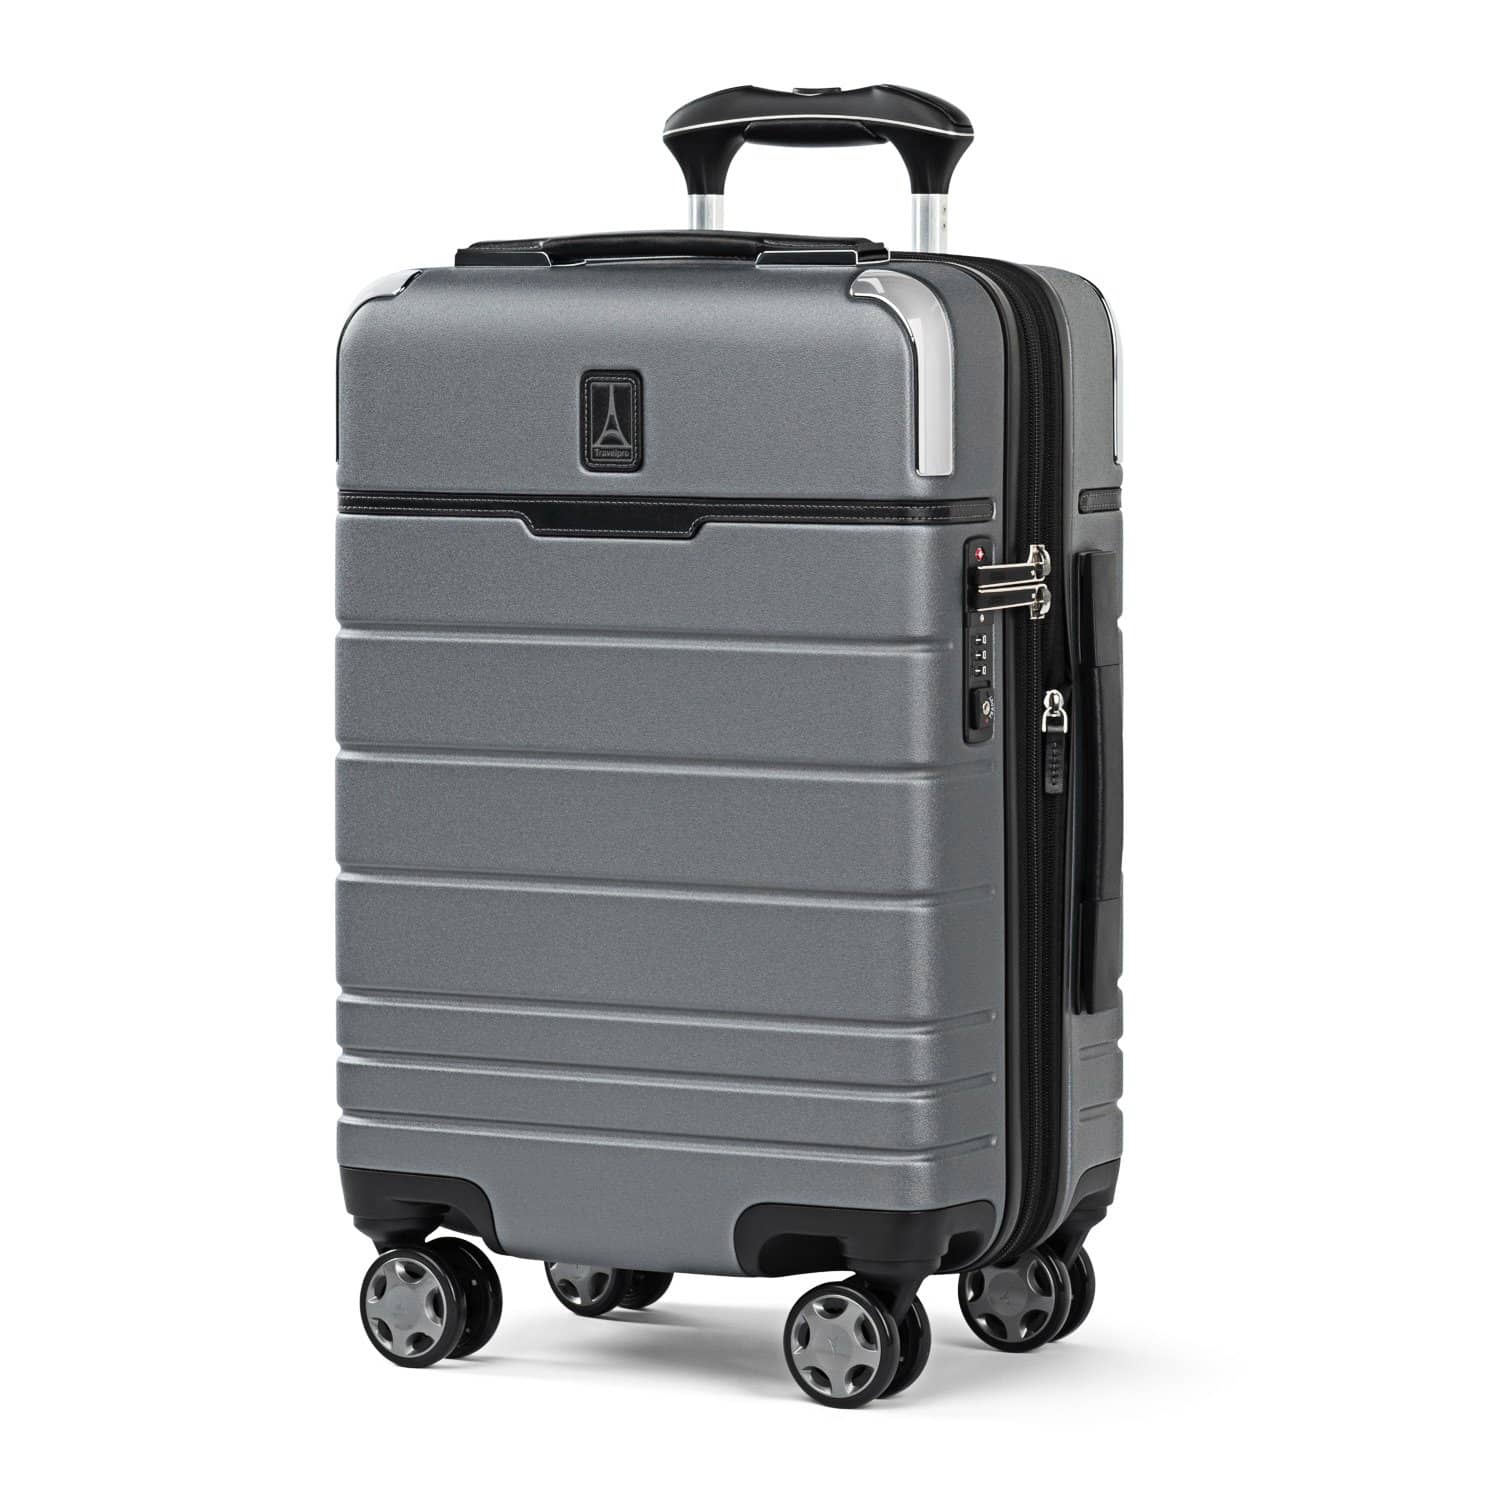 what-is-the-warranty-on-travelpro-luggage